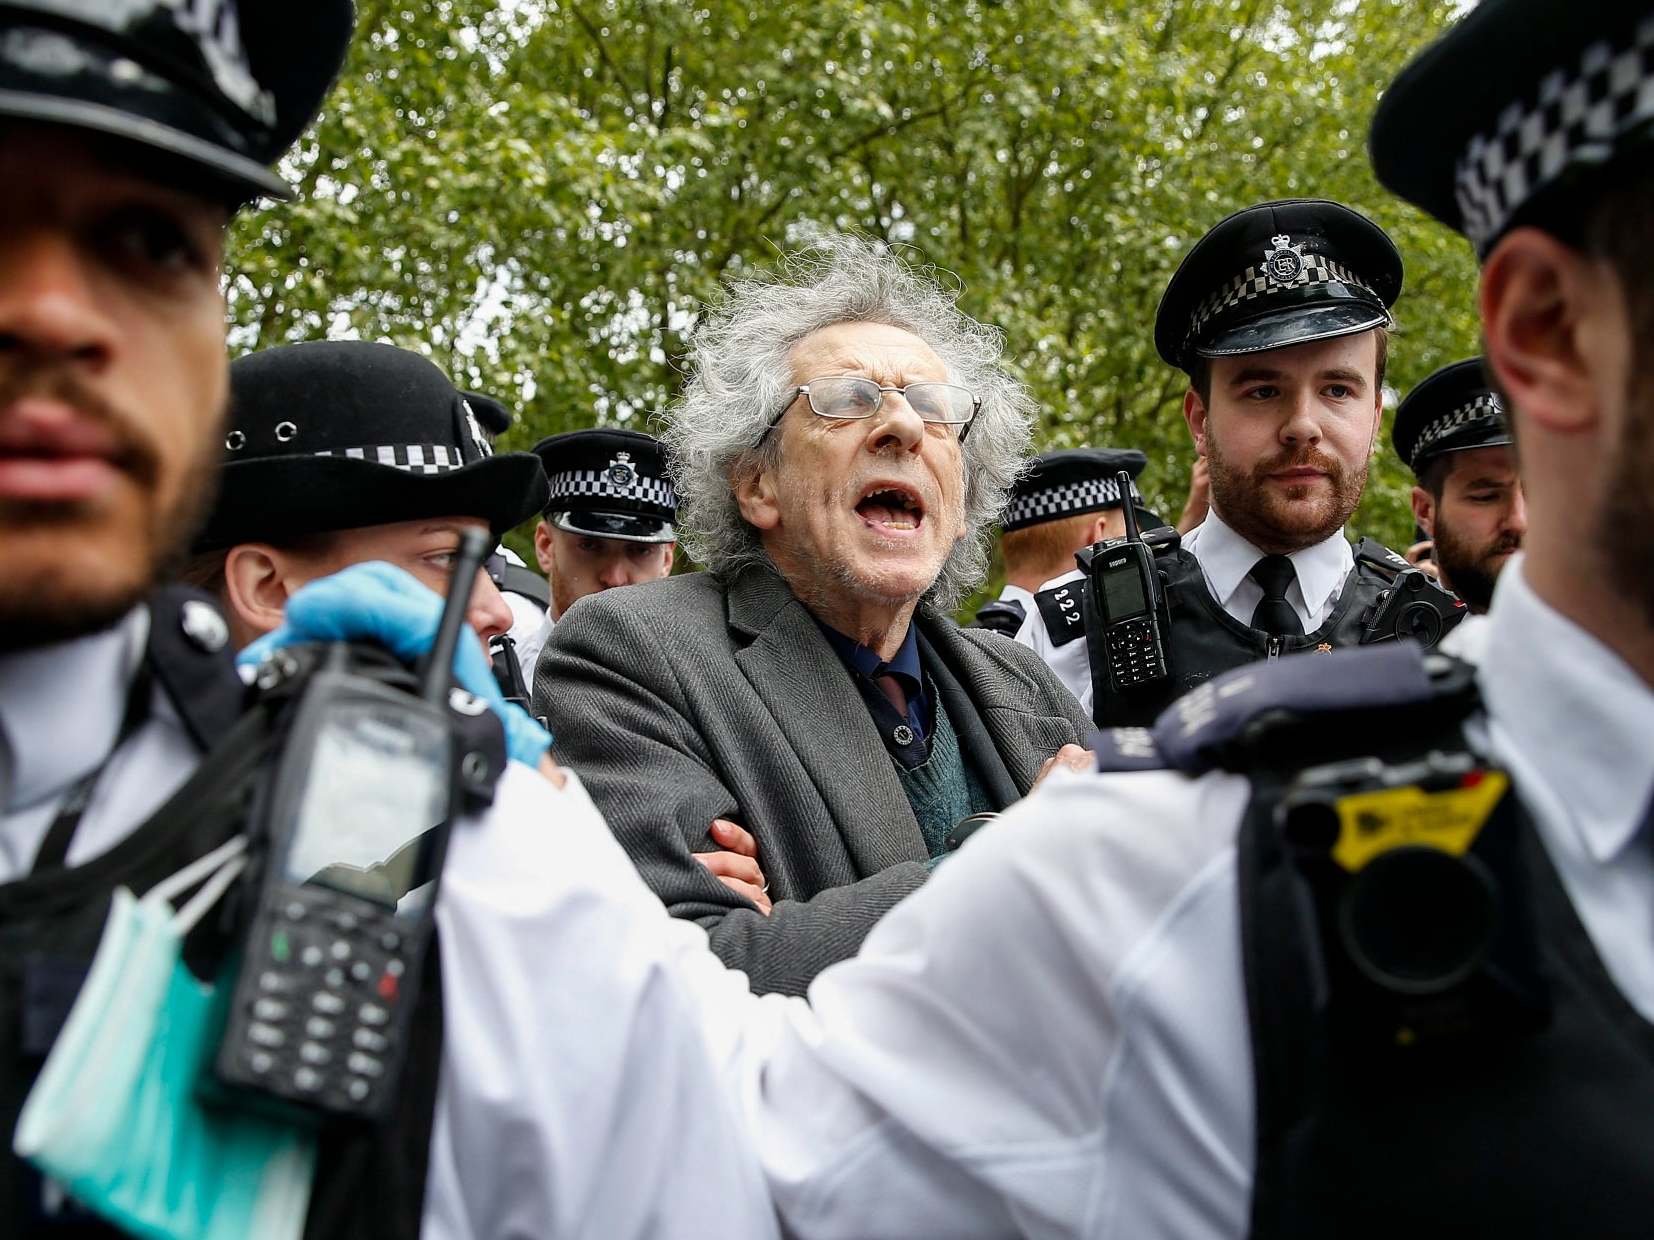 Police officers apprehend Piers Corbyn, Jeremy Corbyn’s brother, during a demonstration against the coronavirus lockdown in Hyde Park on 16 May (Hollie Adams/Getty Images)